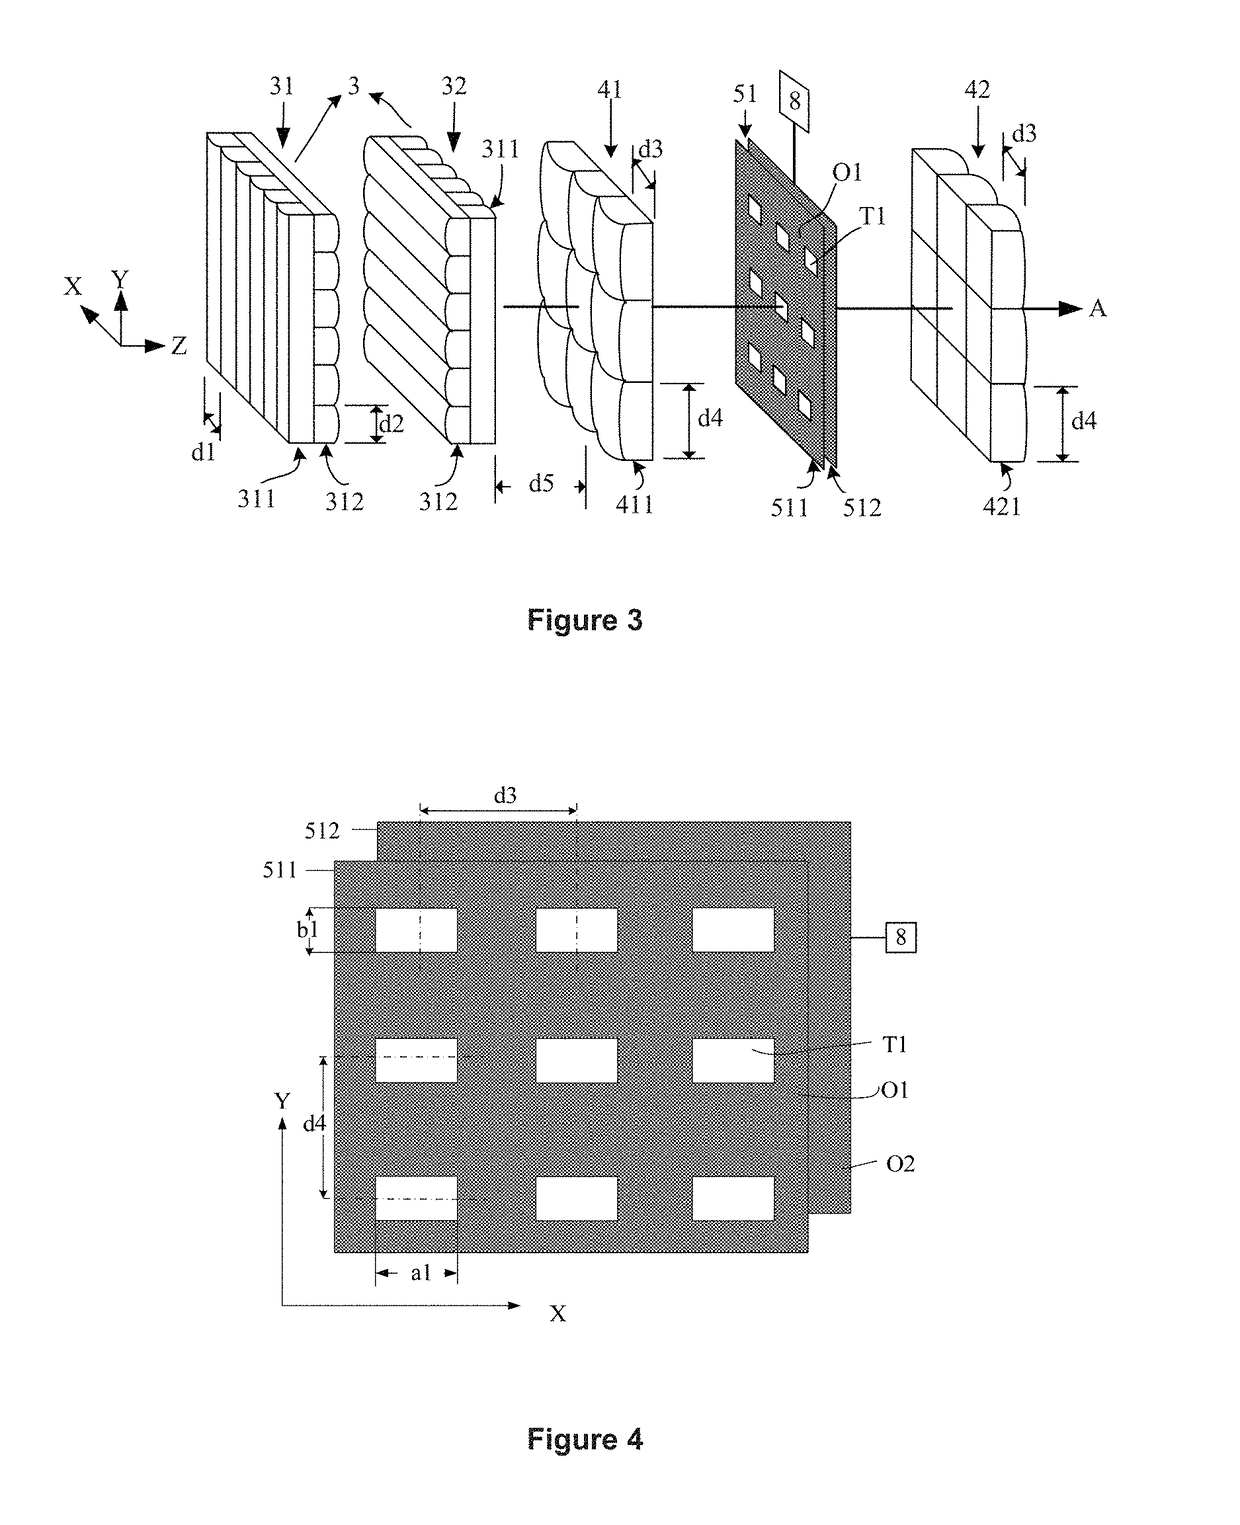 Illumination system for lithographic projection exposure step-and-scan apparatus